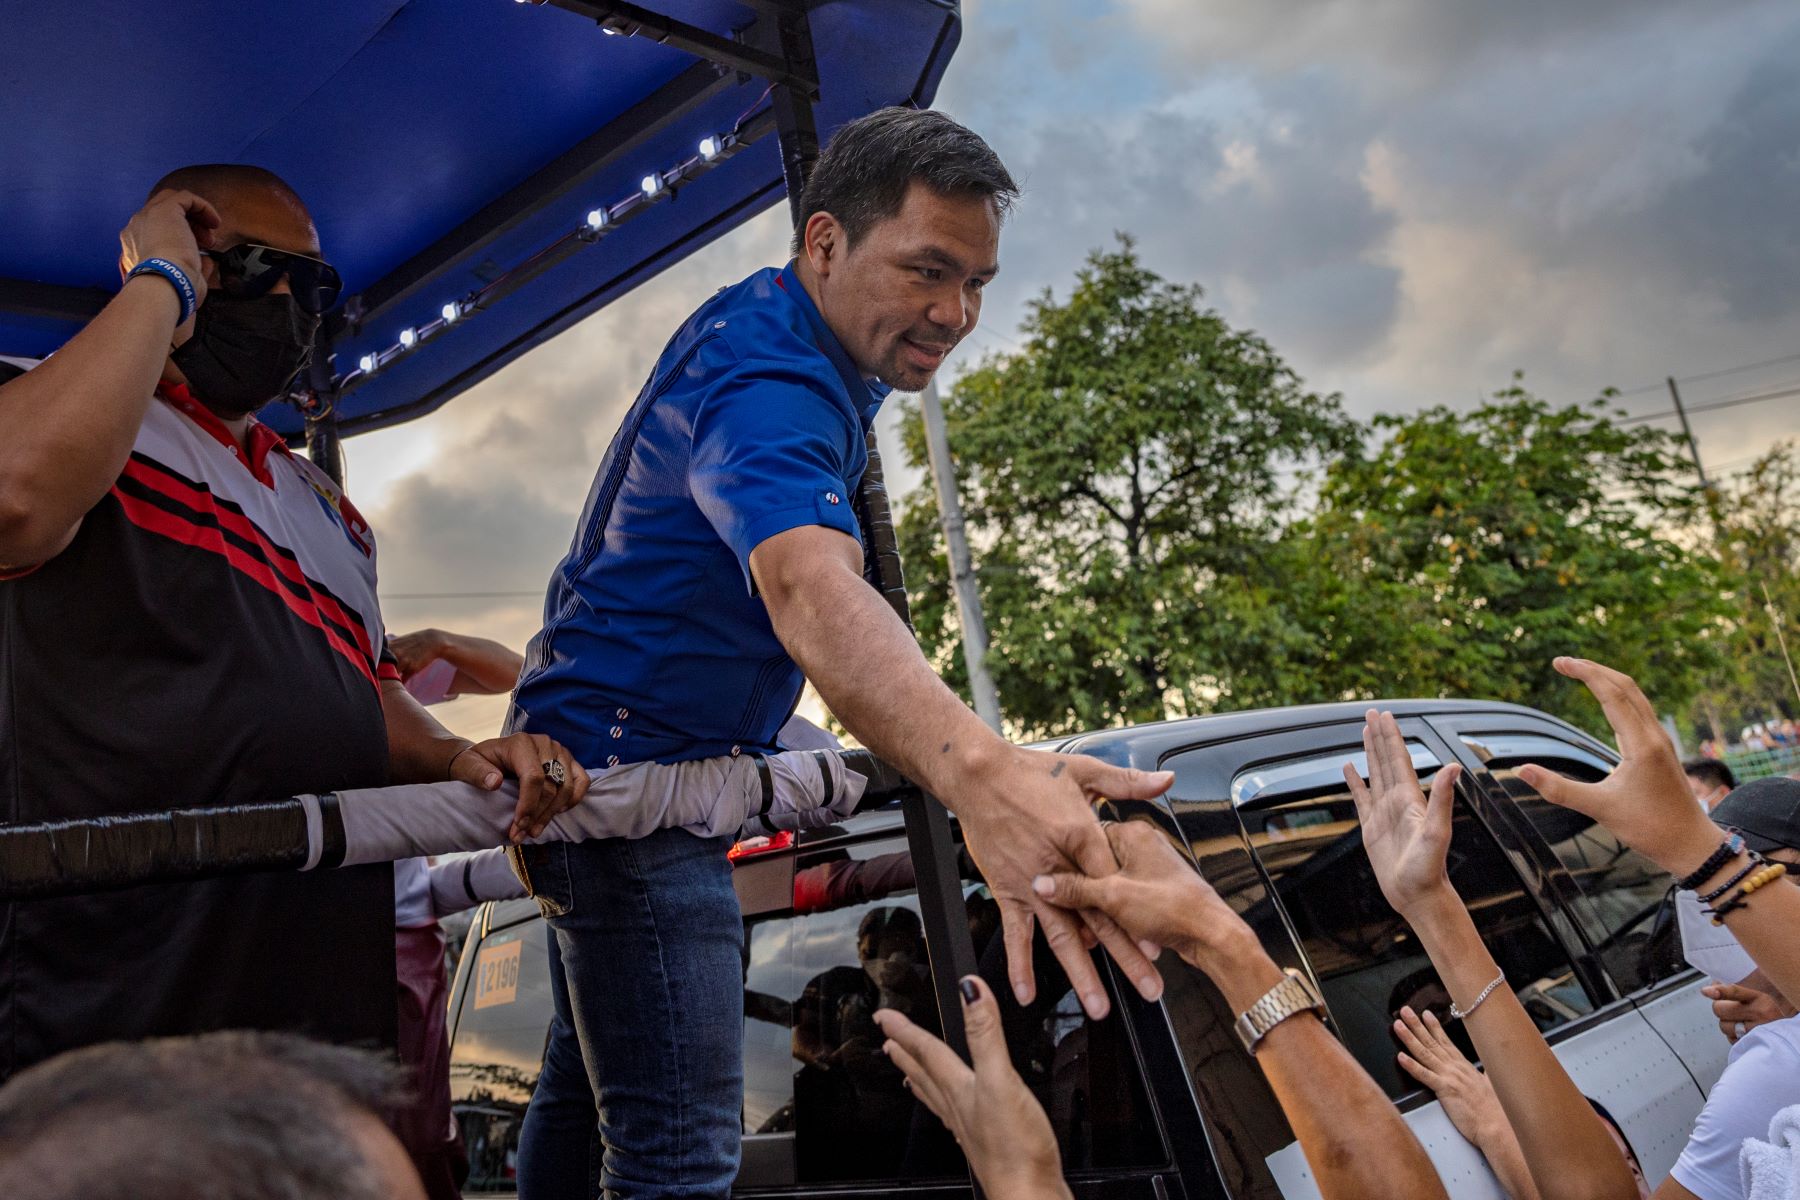 Philippines Presidential Candidate and boxer Manny Pacquiao on a campaign motorcade in Manila